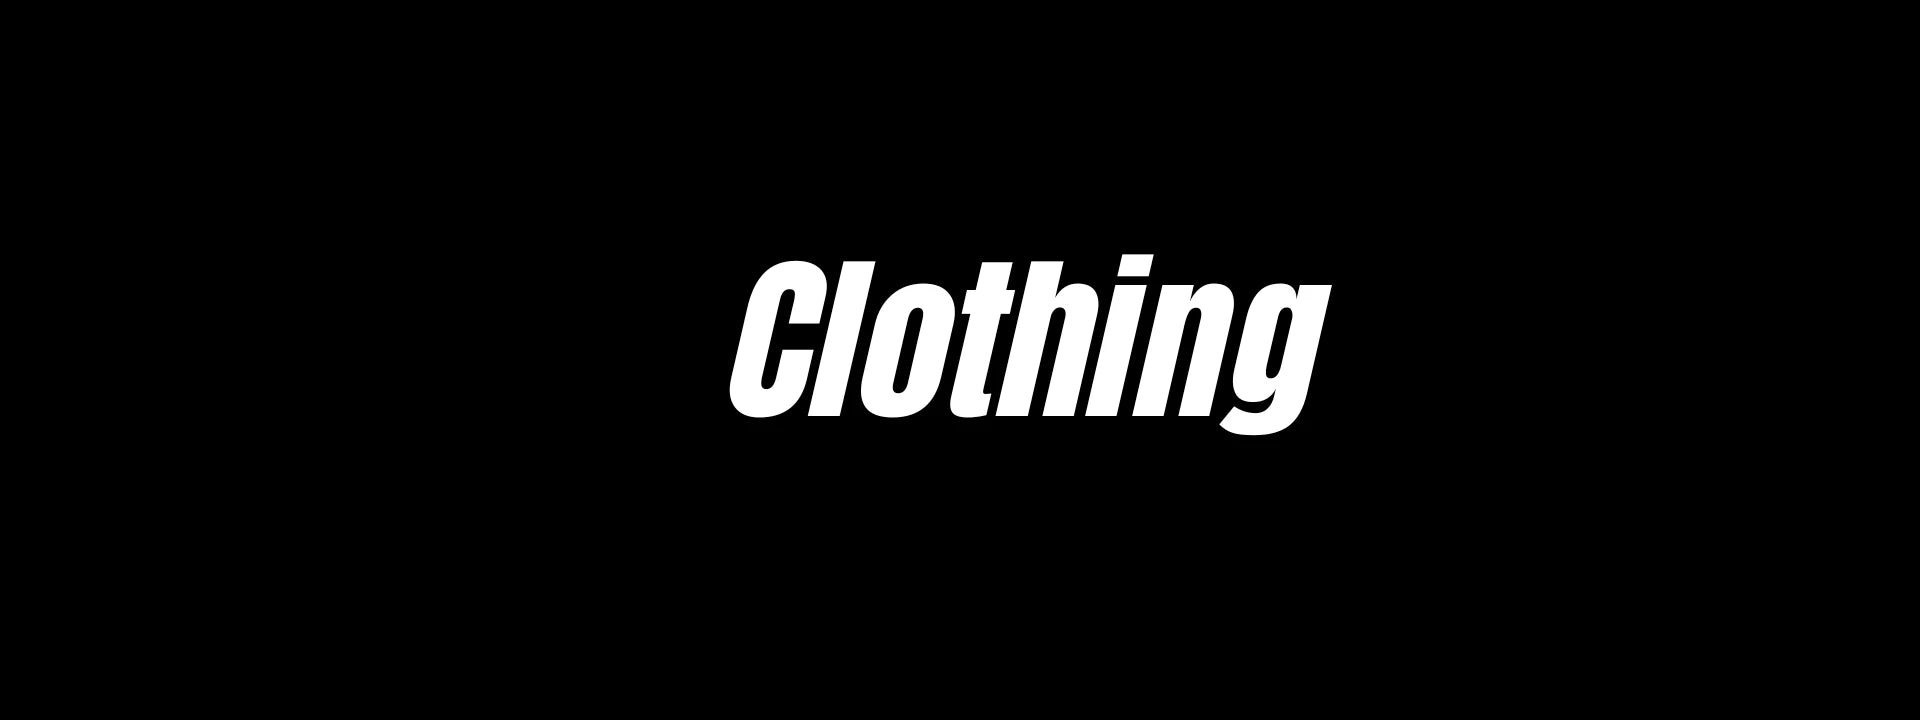 Clothing Peoria, IL The Floratory